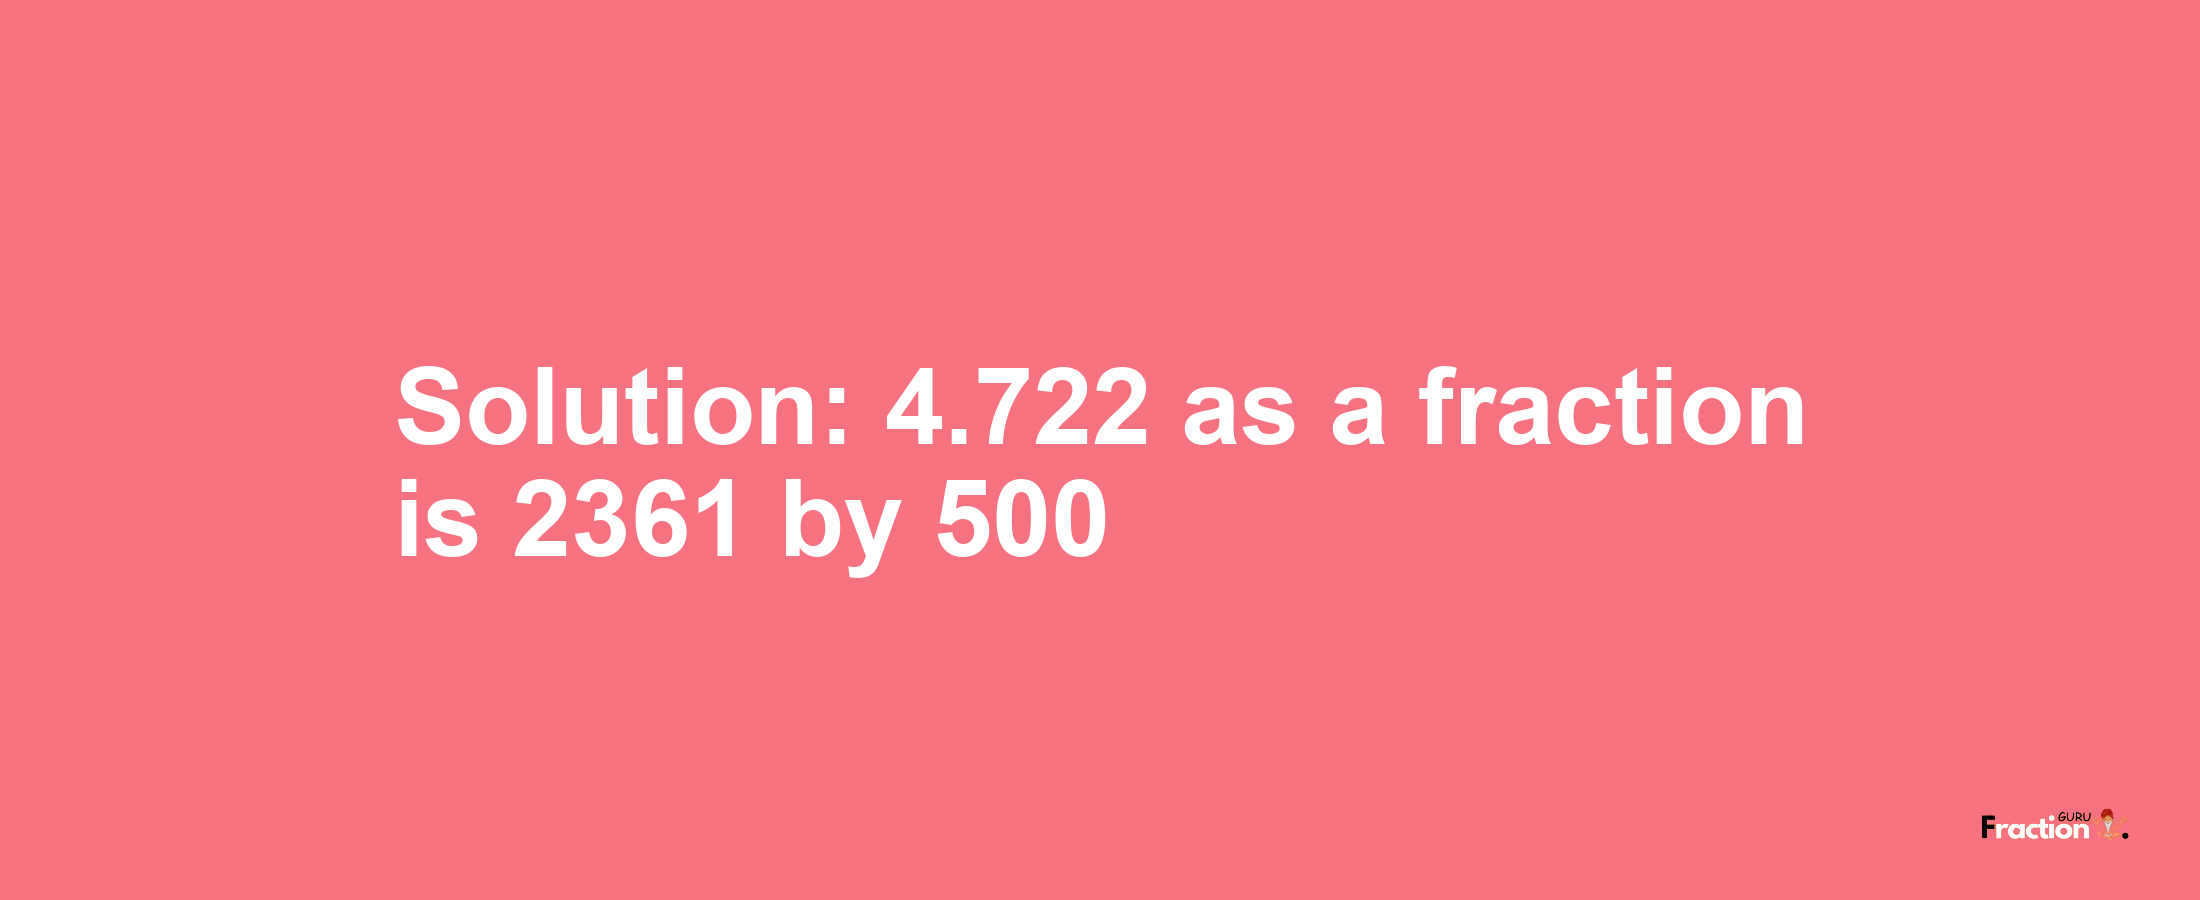 Solution:4.722 as a fraction is 2361/500